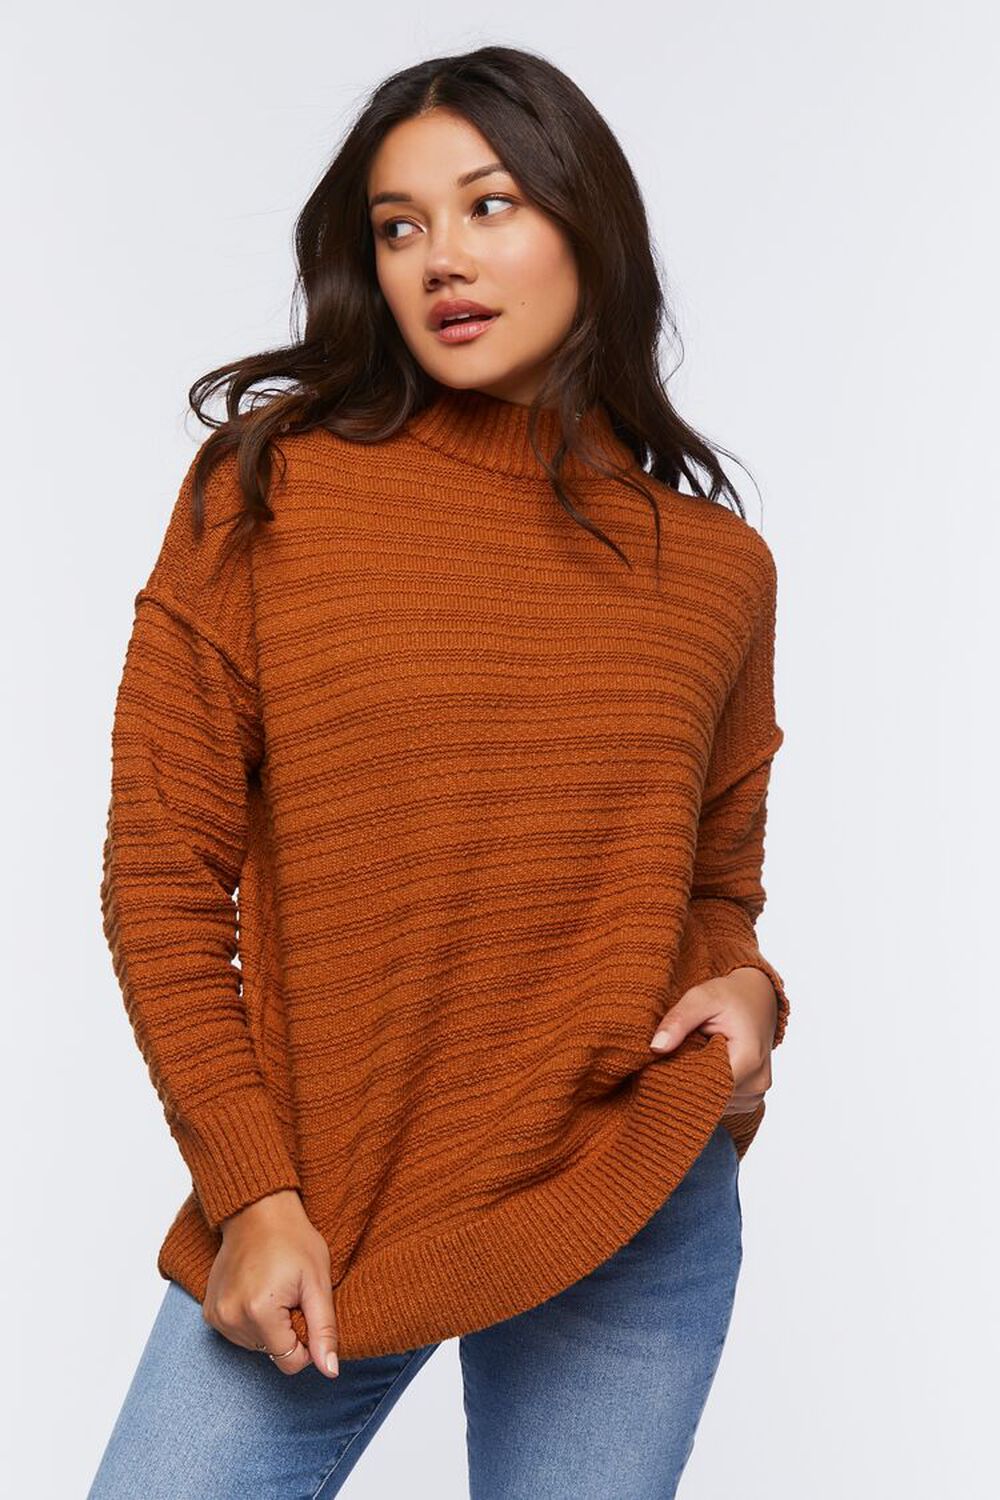 GINGER Ribbed Mock Neck Sweater Top, image 1